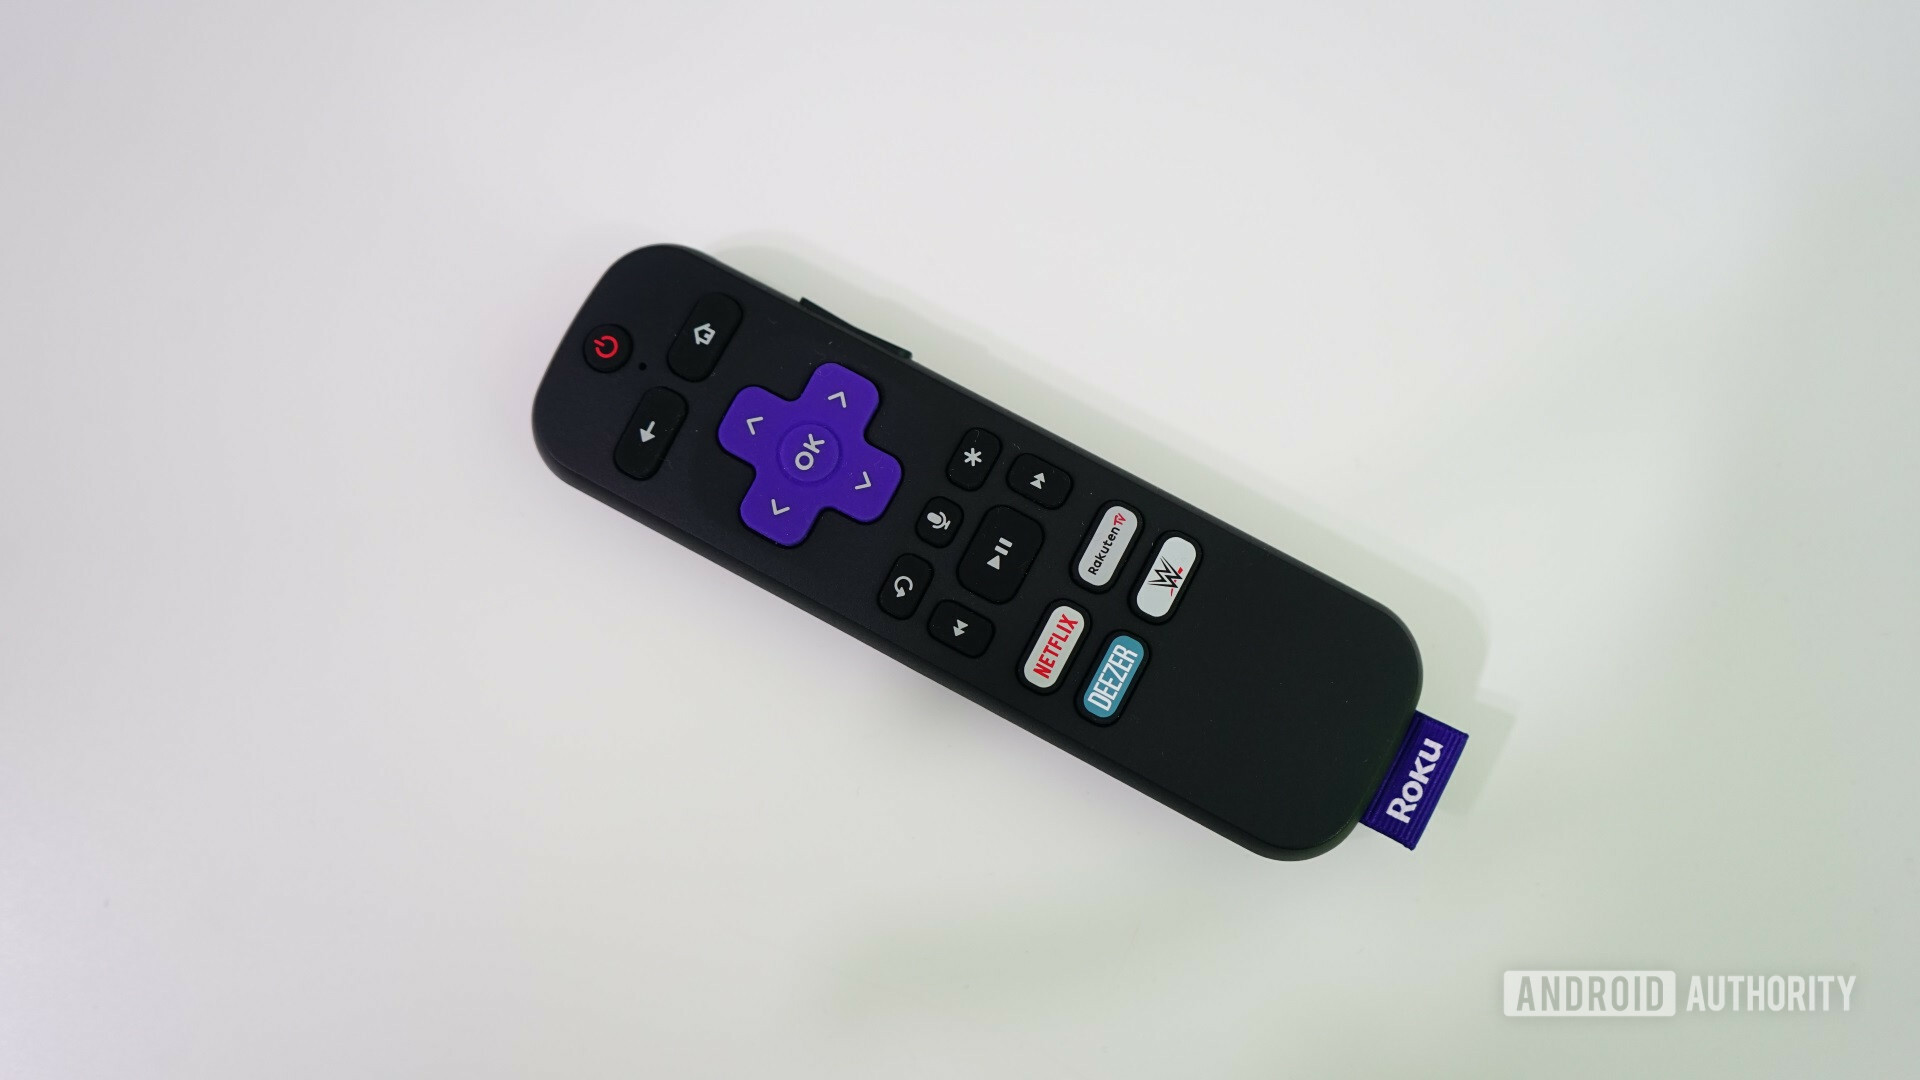 Top view of the Roku Streaming Stick Plus remote against a white background.